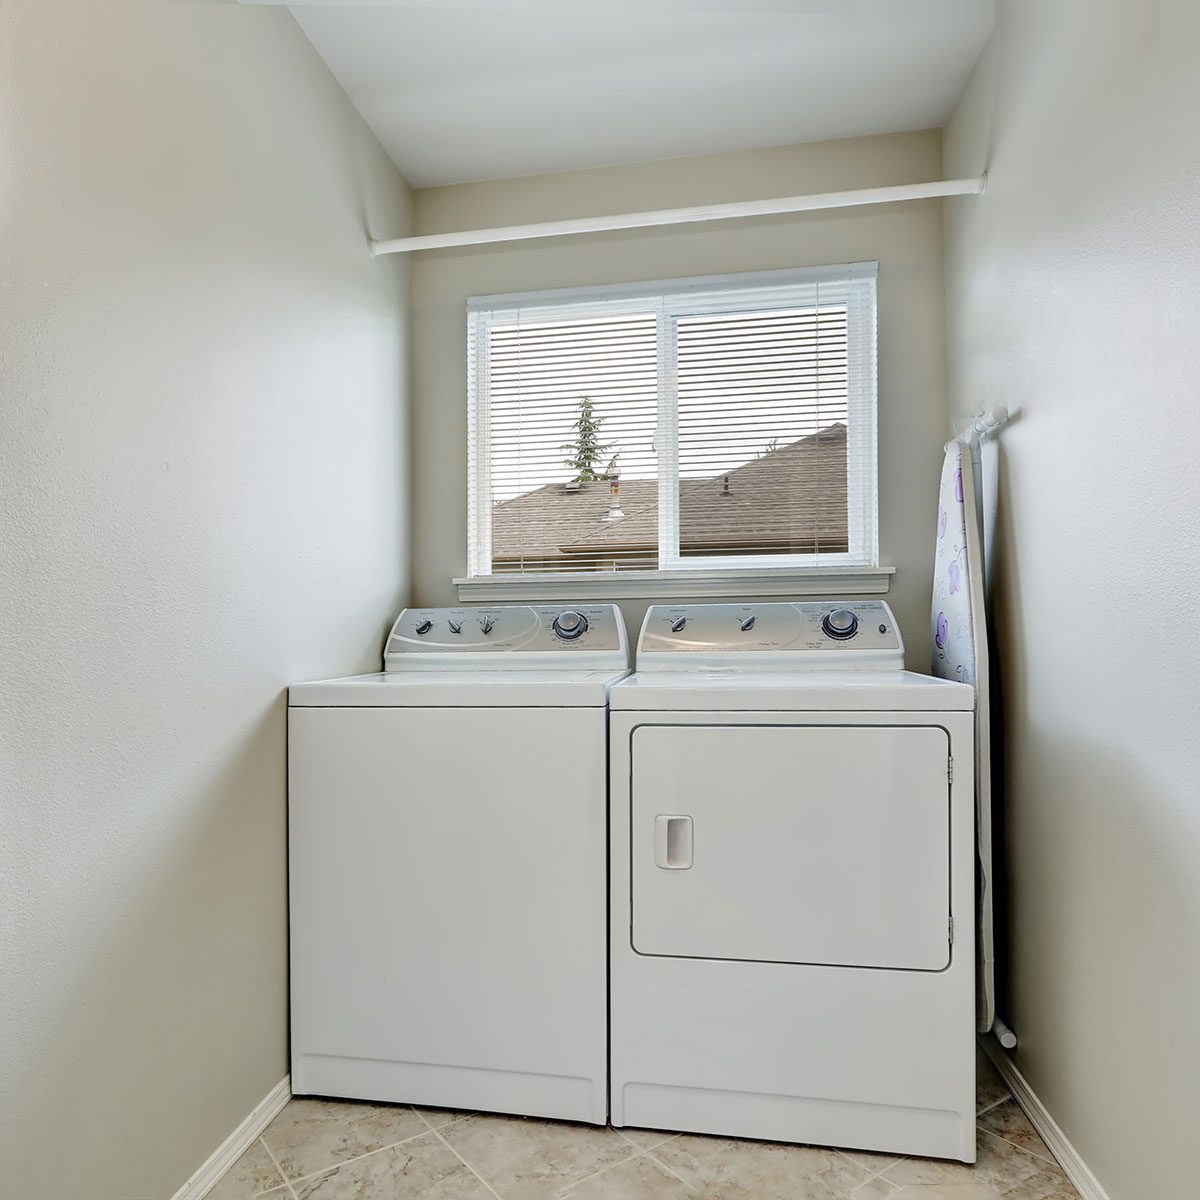 8 Small Laundry Room Ideas With a Top-Loading Washer